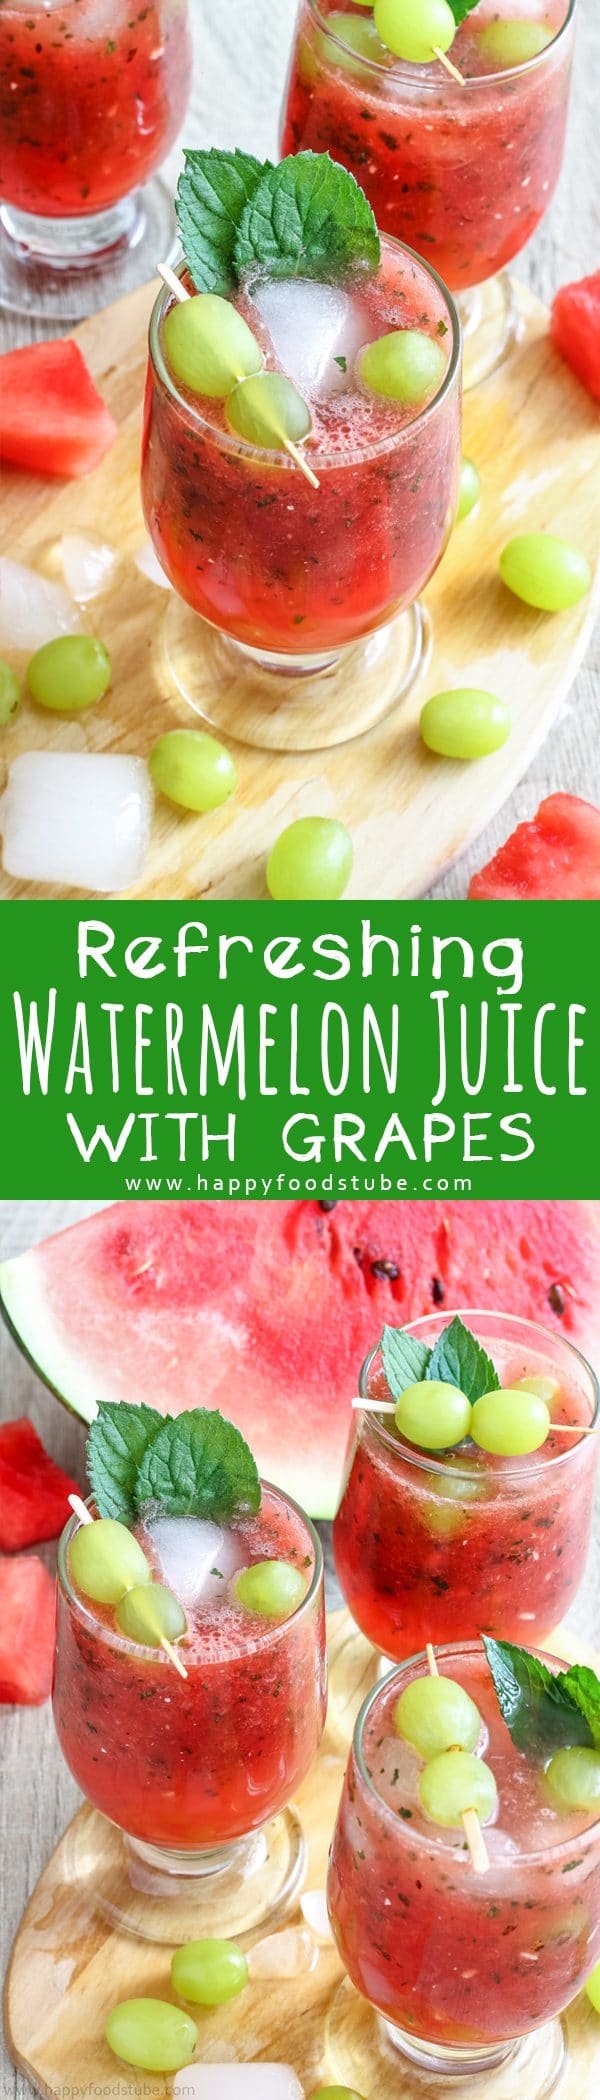 Refreshing Watermelon Juice with Grapes Recipe Collage